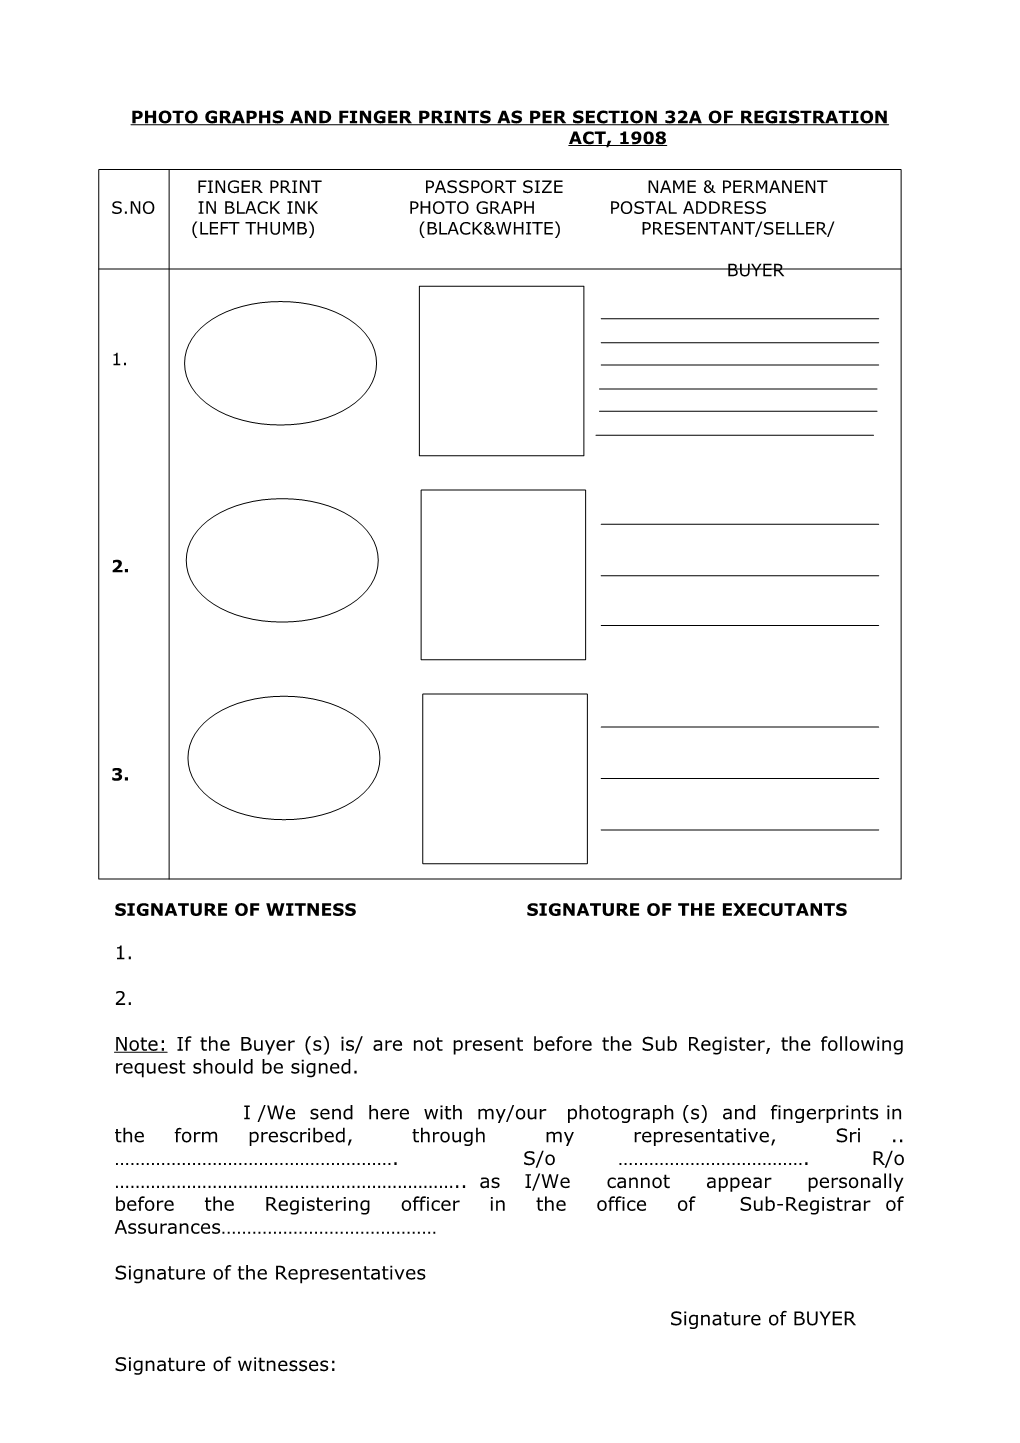 Photo Graphs and Finger Prints As Per Section 32A of Registration Act, 1908